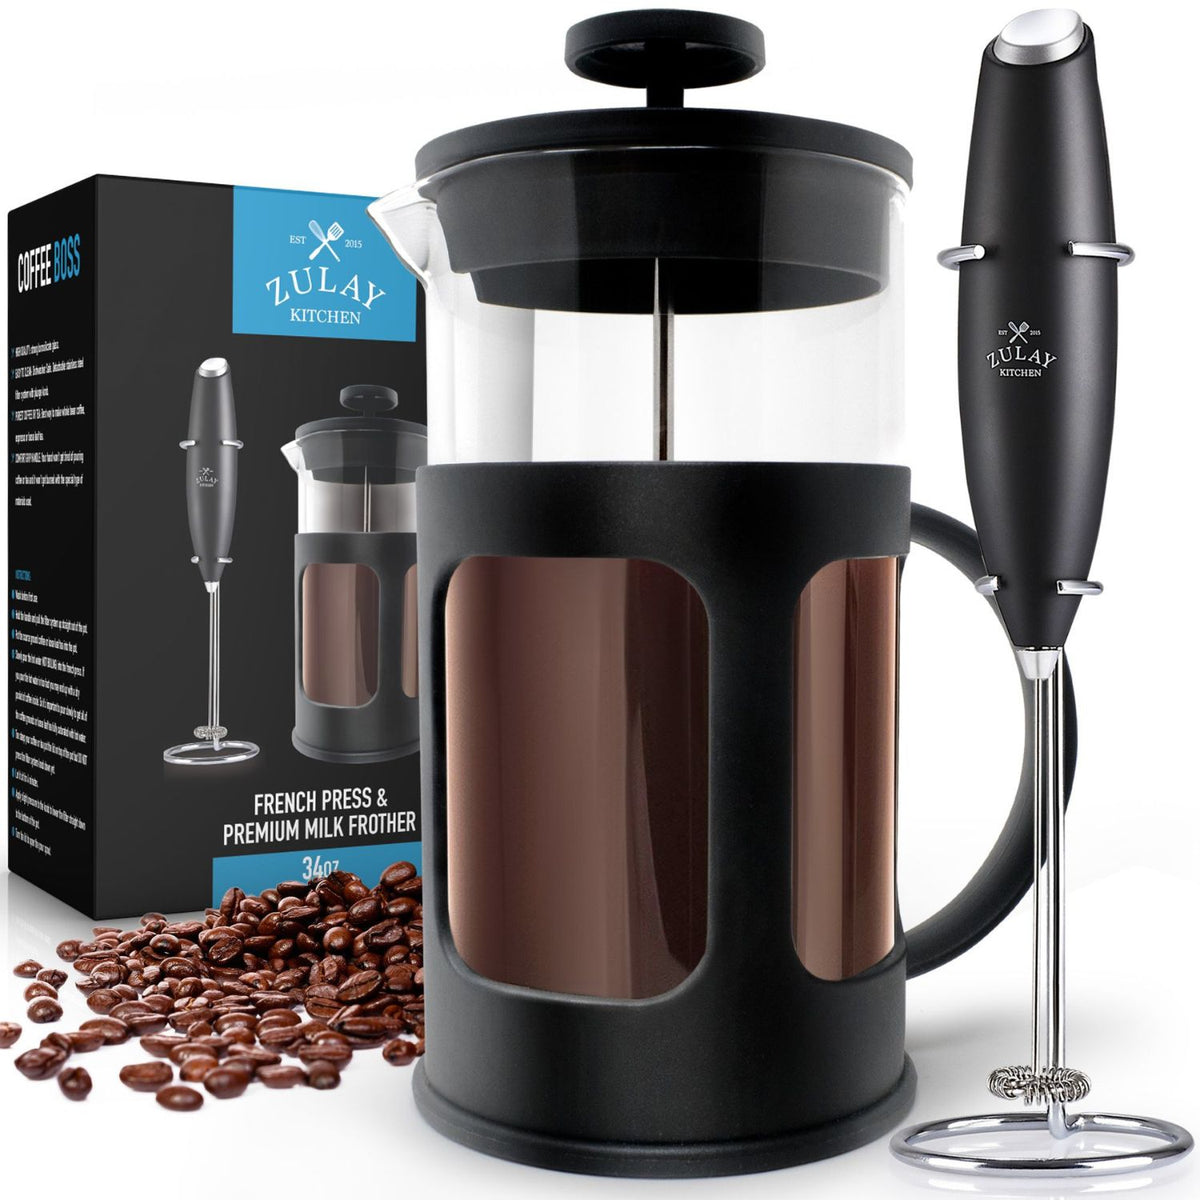 BEAN ENVY PROFESSIONAL FRENCH PRESS COFFEE MAKER AND PREMIUM MILK FROTHER  New!